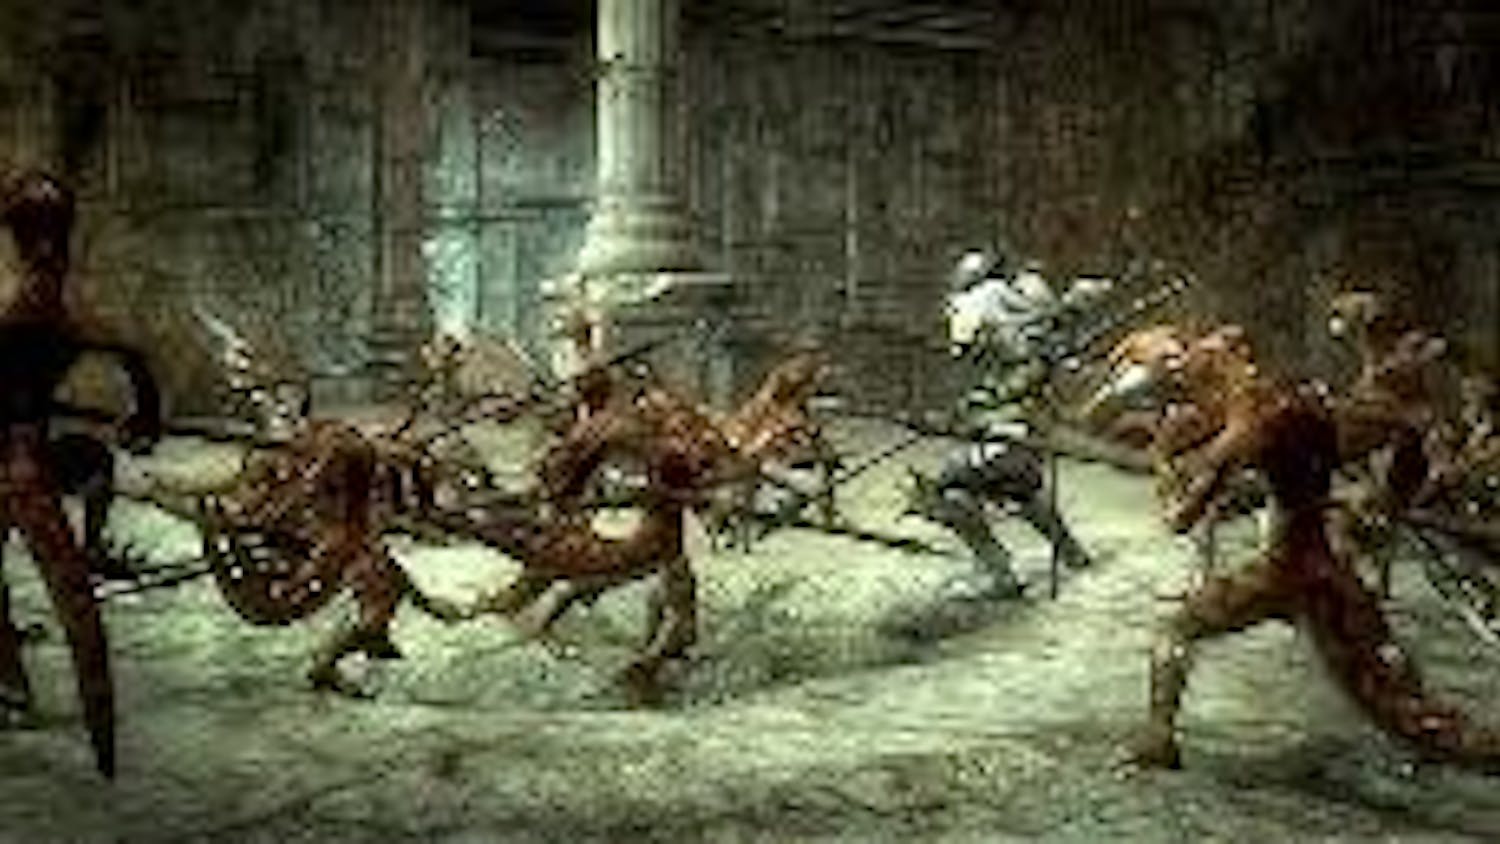 MORTAL COMBAT - In the latest installment of the "Kingdom Under Fire" series, "Circle of Doom" players control one of six characters instead of commanding an army. Here, a character fights multiple enemies, demonstrating the game's new combat systems.